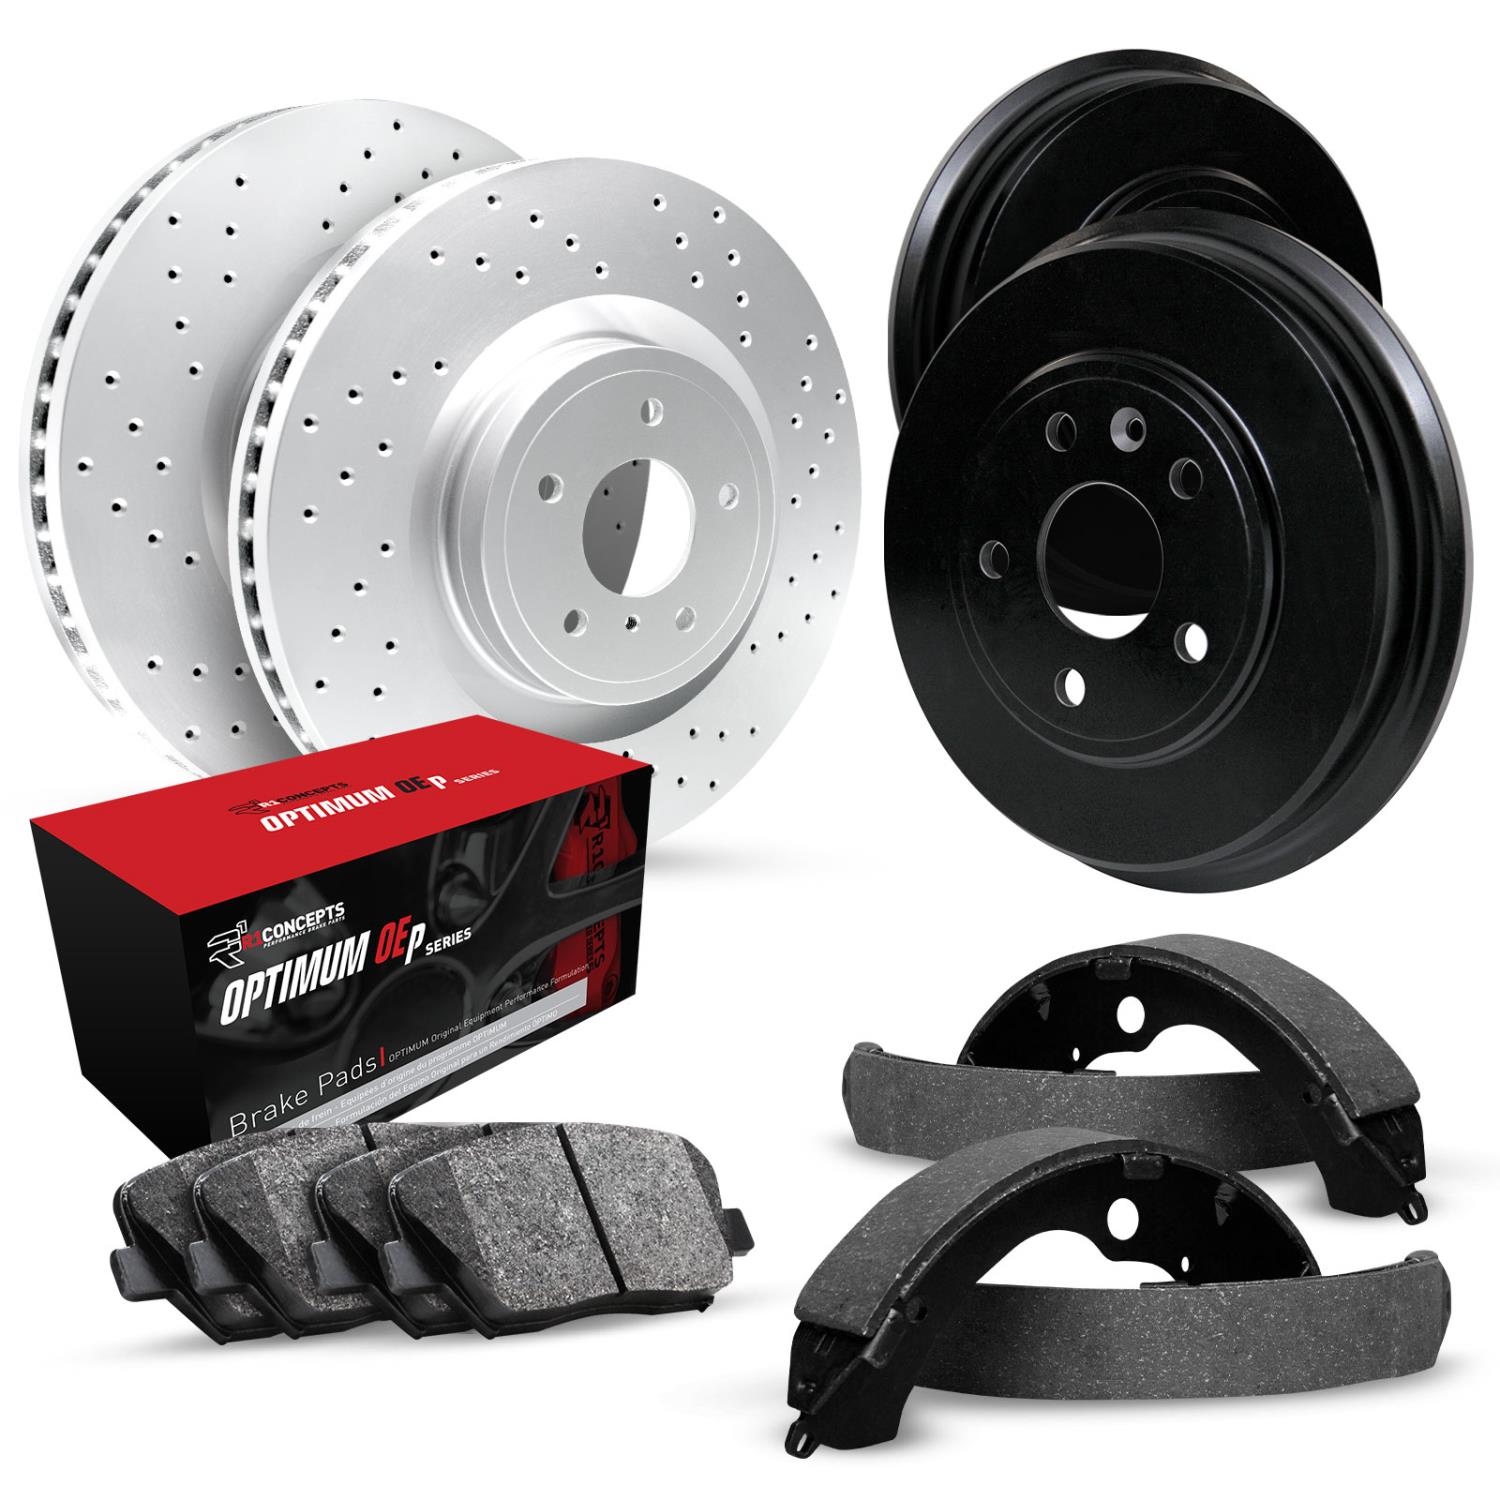 GEO-Carbon Drilled Brake Rotor & Drum Set w/Optimum OE Pads & Shoes, 2001-2005 GM, Position: Front & Rear